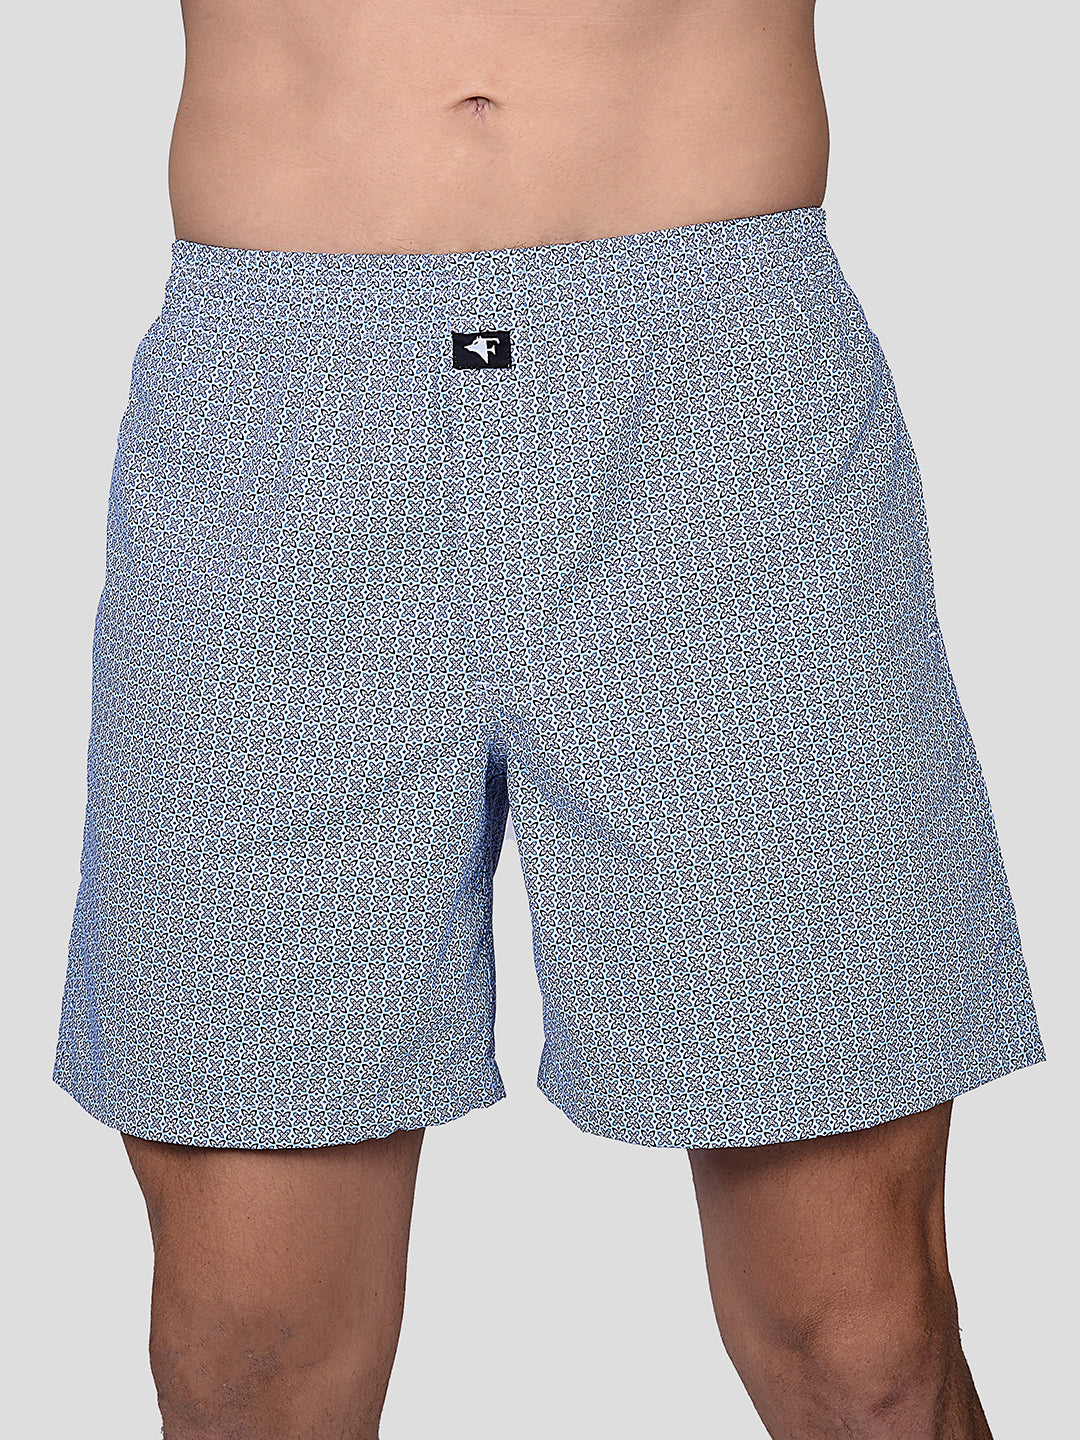 Frenchie Men's Boxer Printed Shorts BR (Assorted)